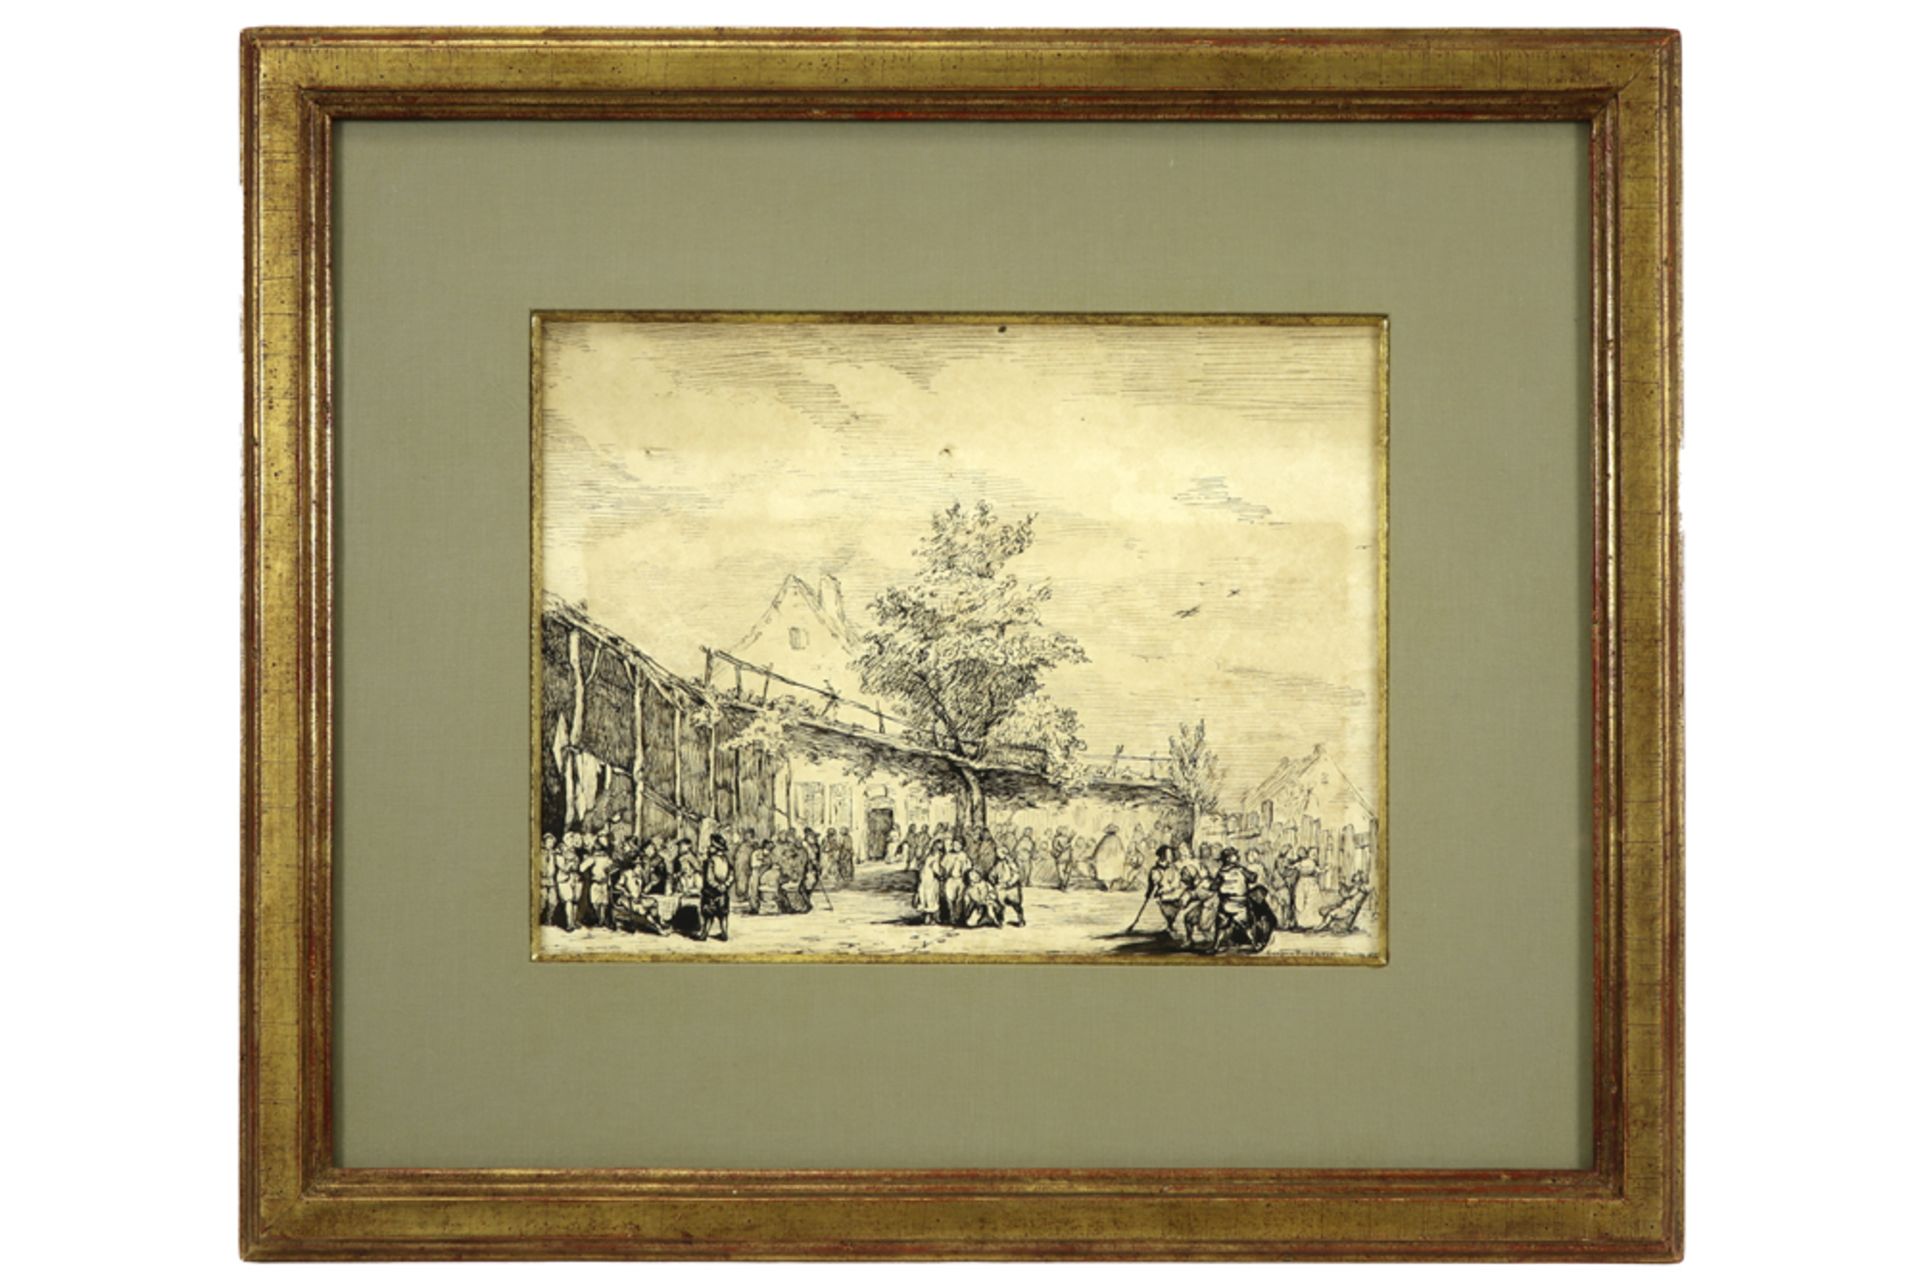 19th Cent. ink drawing - signed Gustave Buschmann and dated 'Anvers 1834' || BUSCHMANN GUSTAVE (1818 - Image 3 of 3